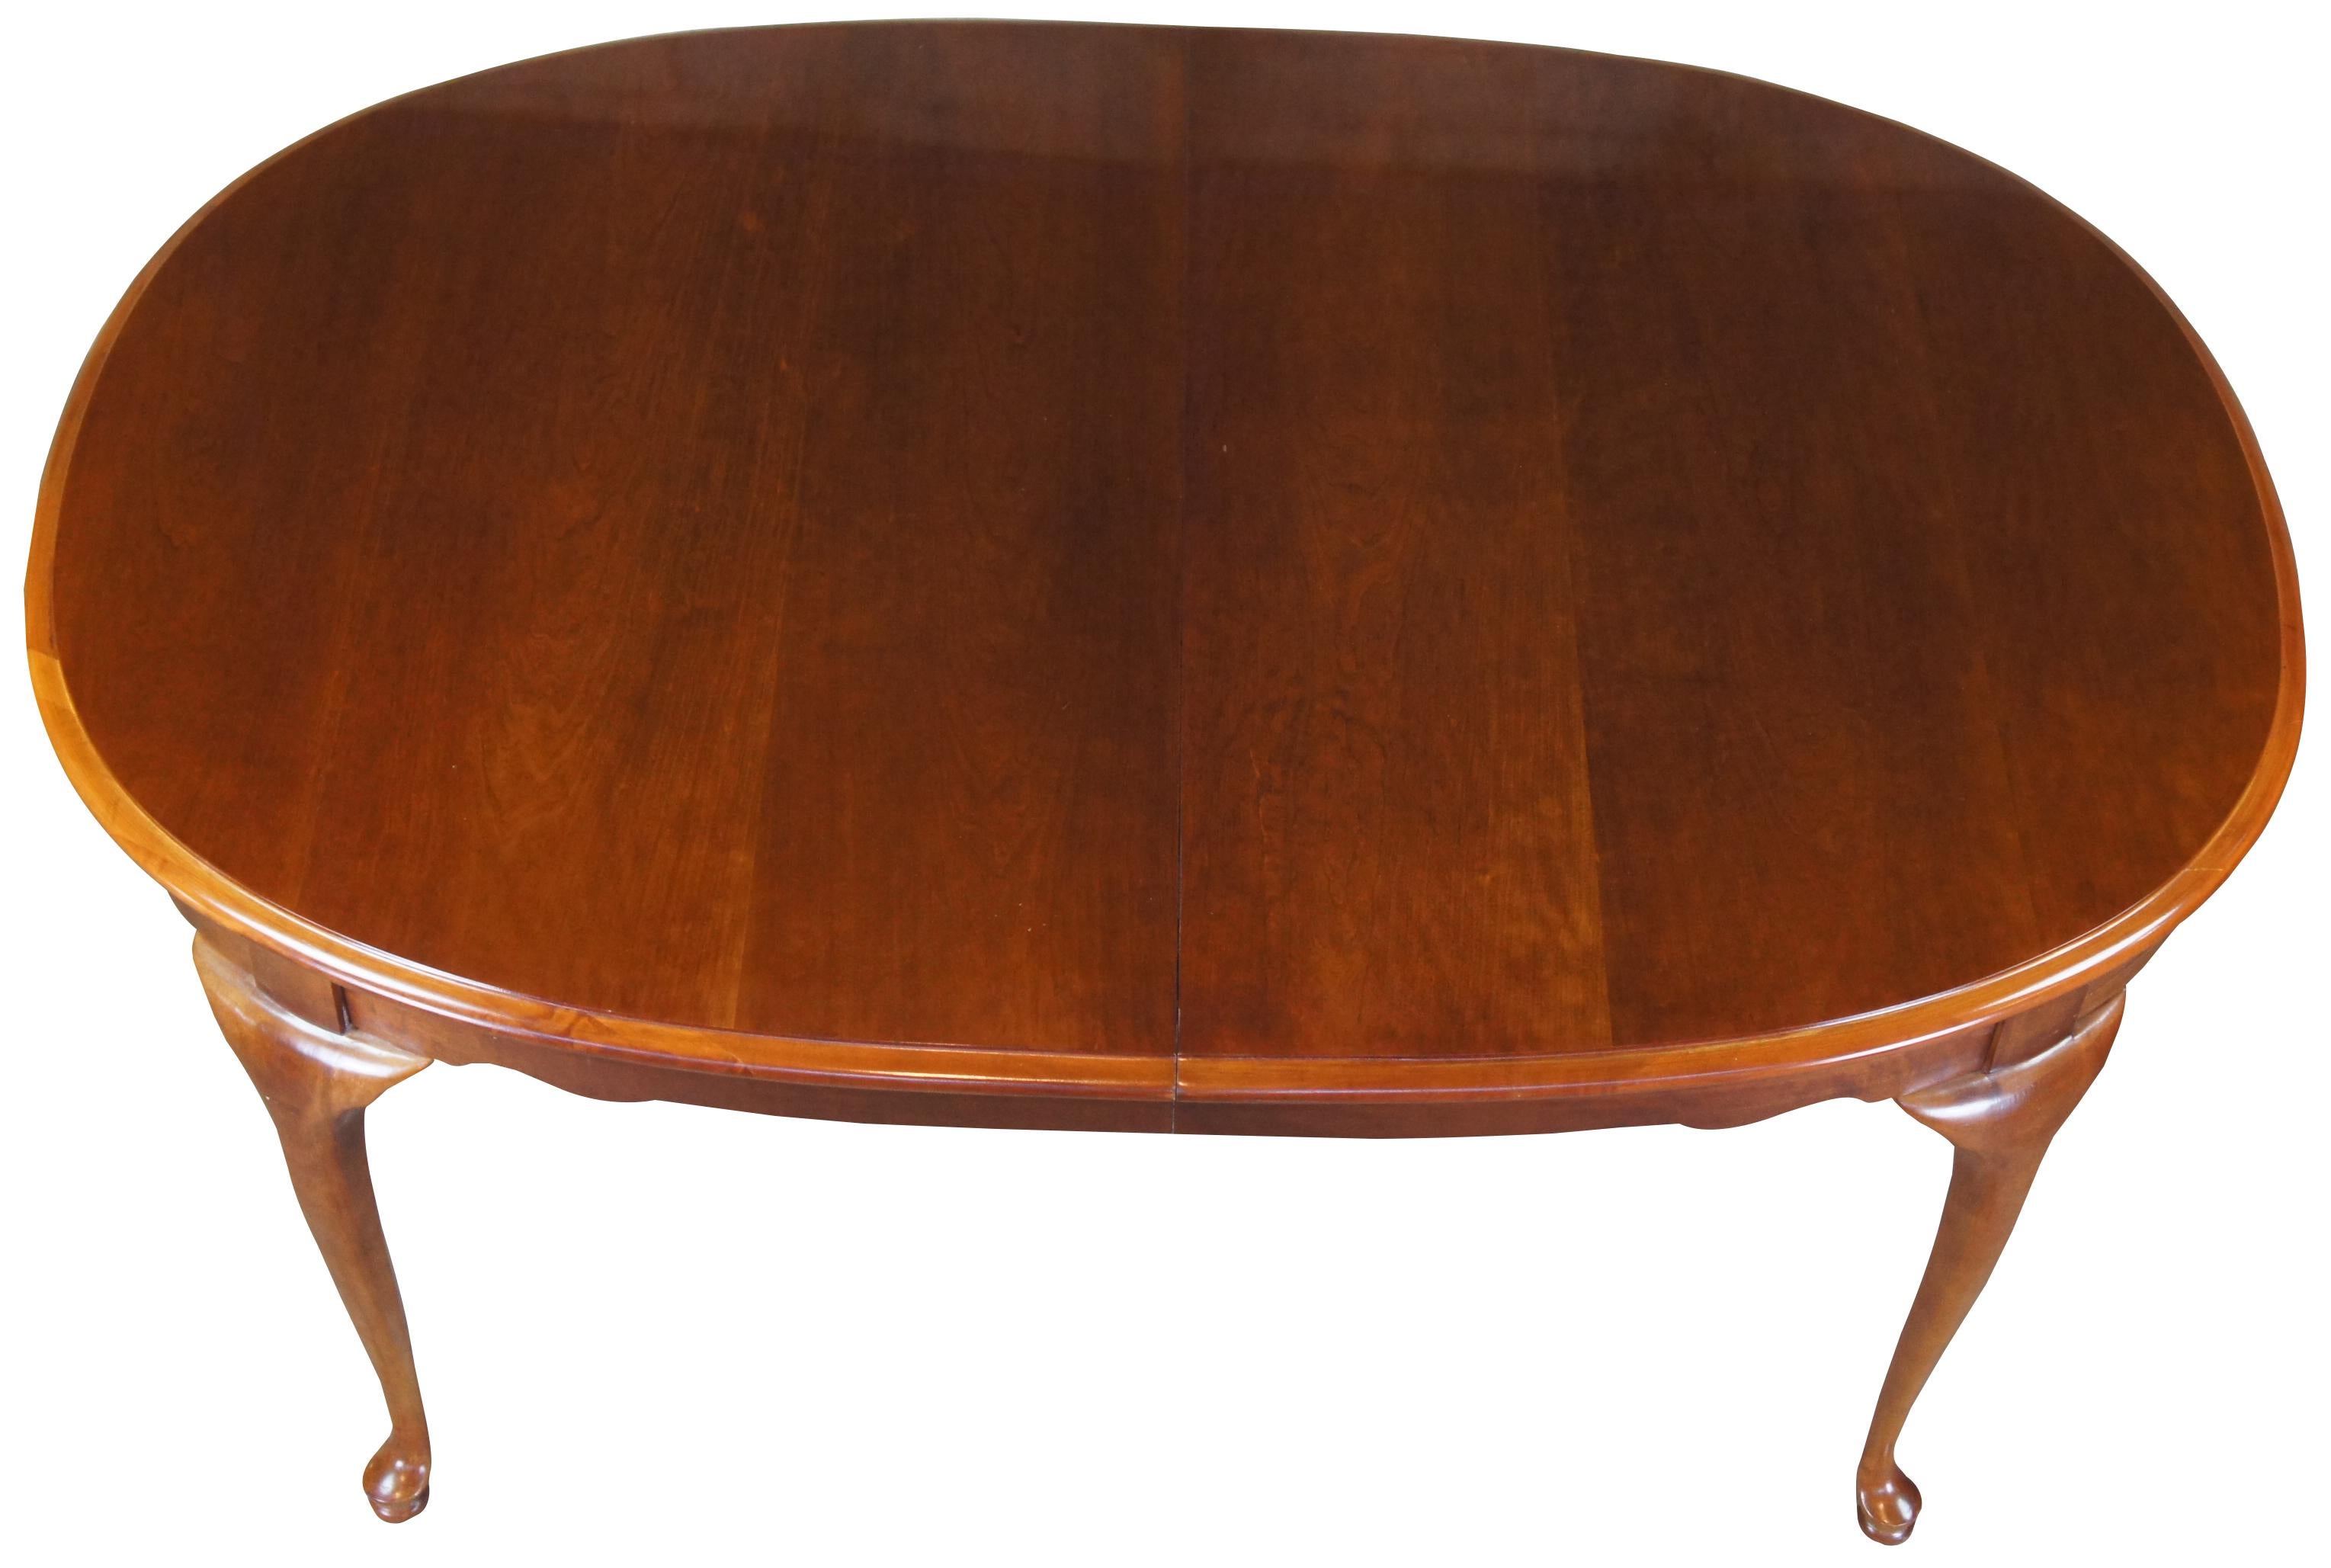 Vintage Stanley Furniture dining table. Made of solid cherry featuring an oval shape with two leaves and slipper feet. Measure: 98